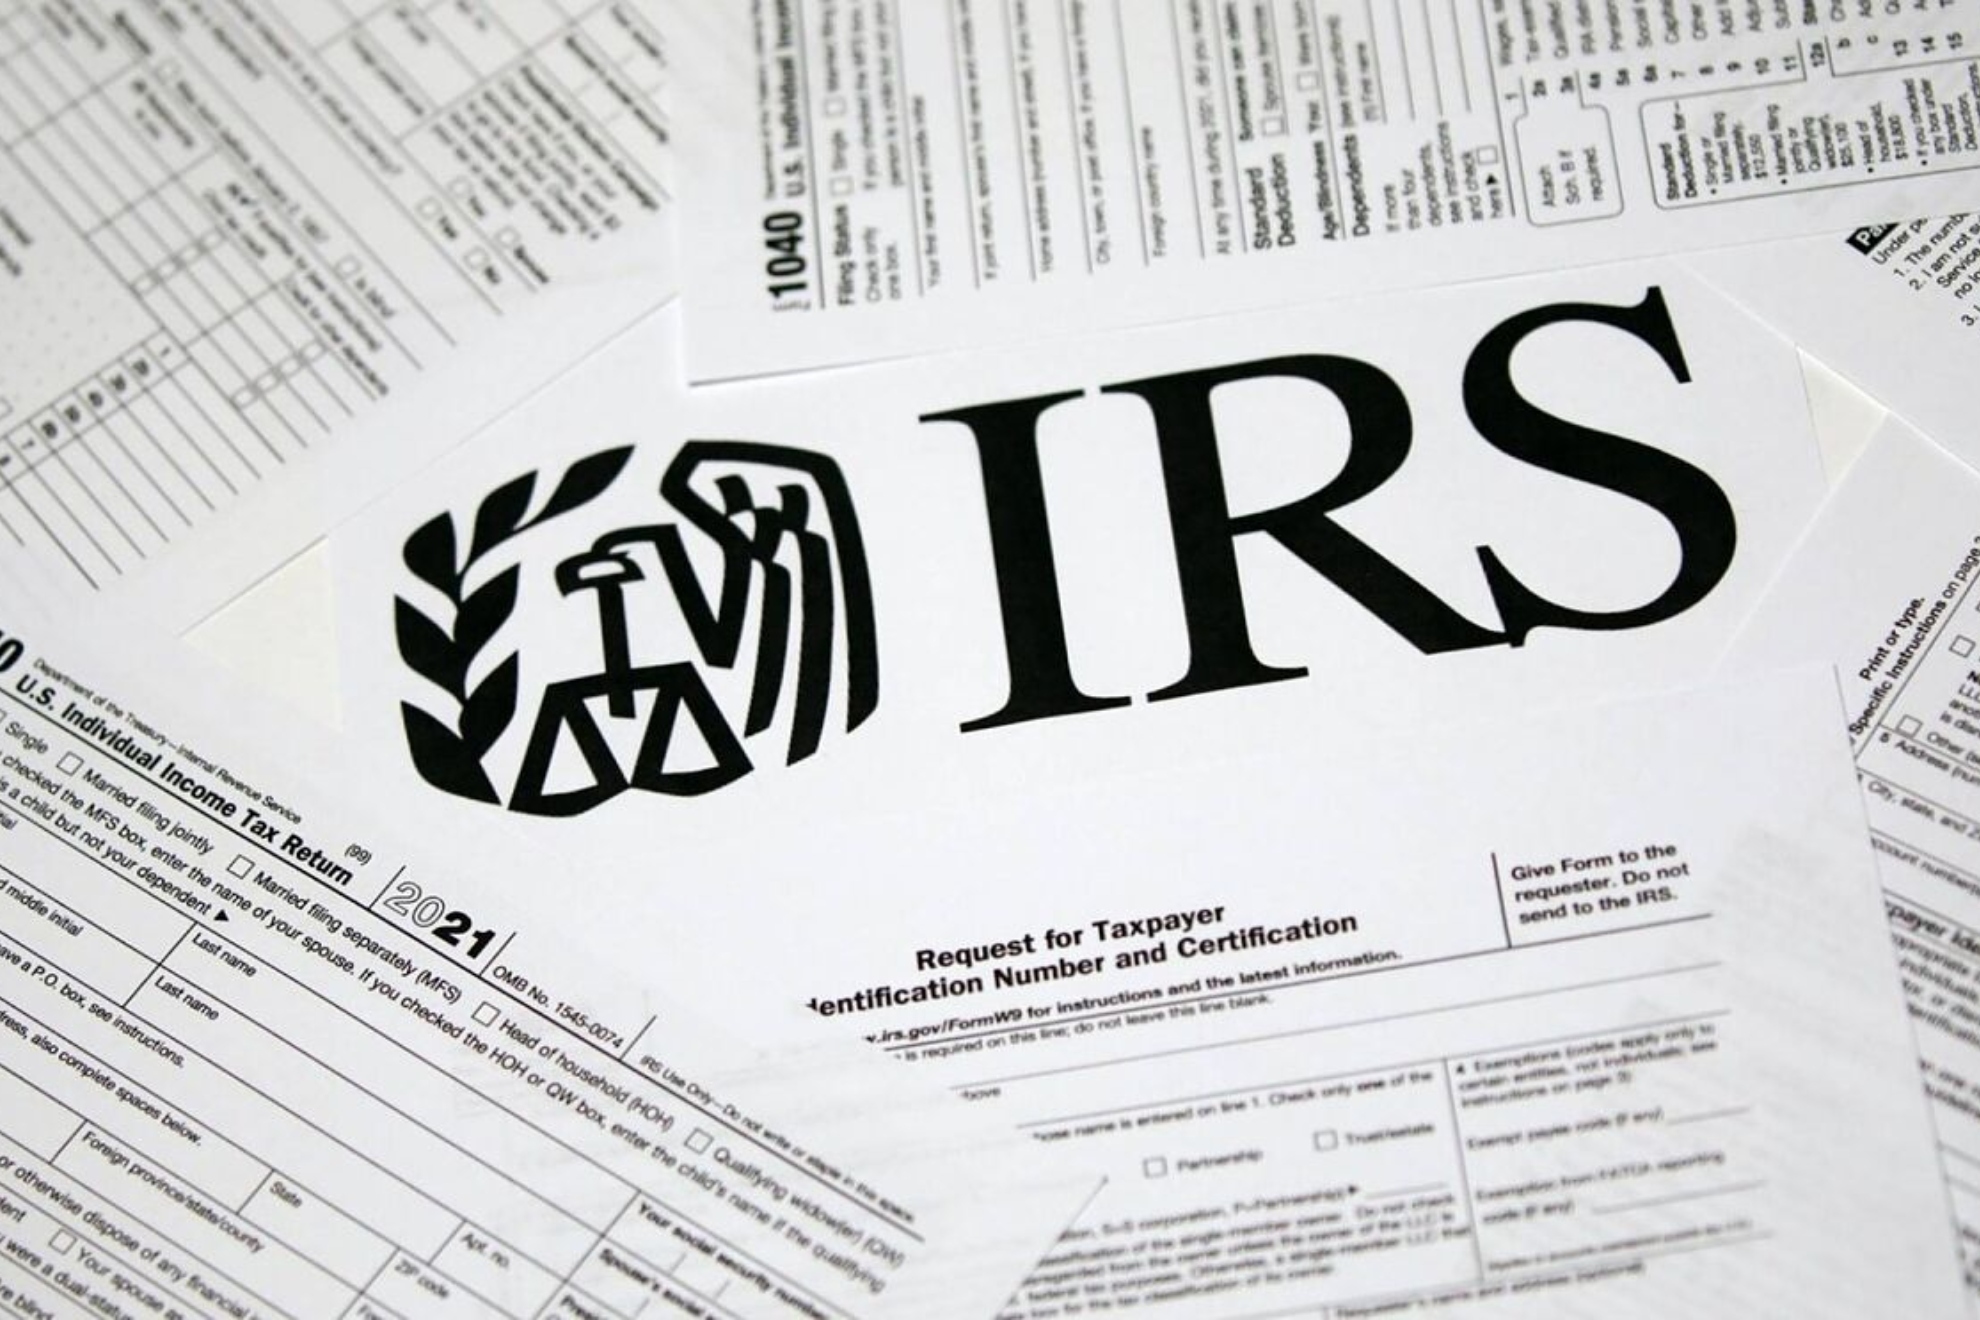 Need IRS Transcripts? Here's how toget them online and what you need to know